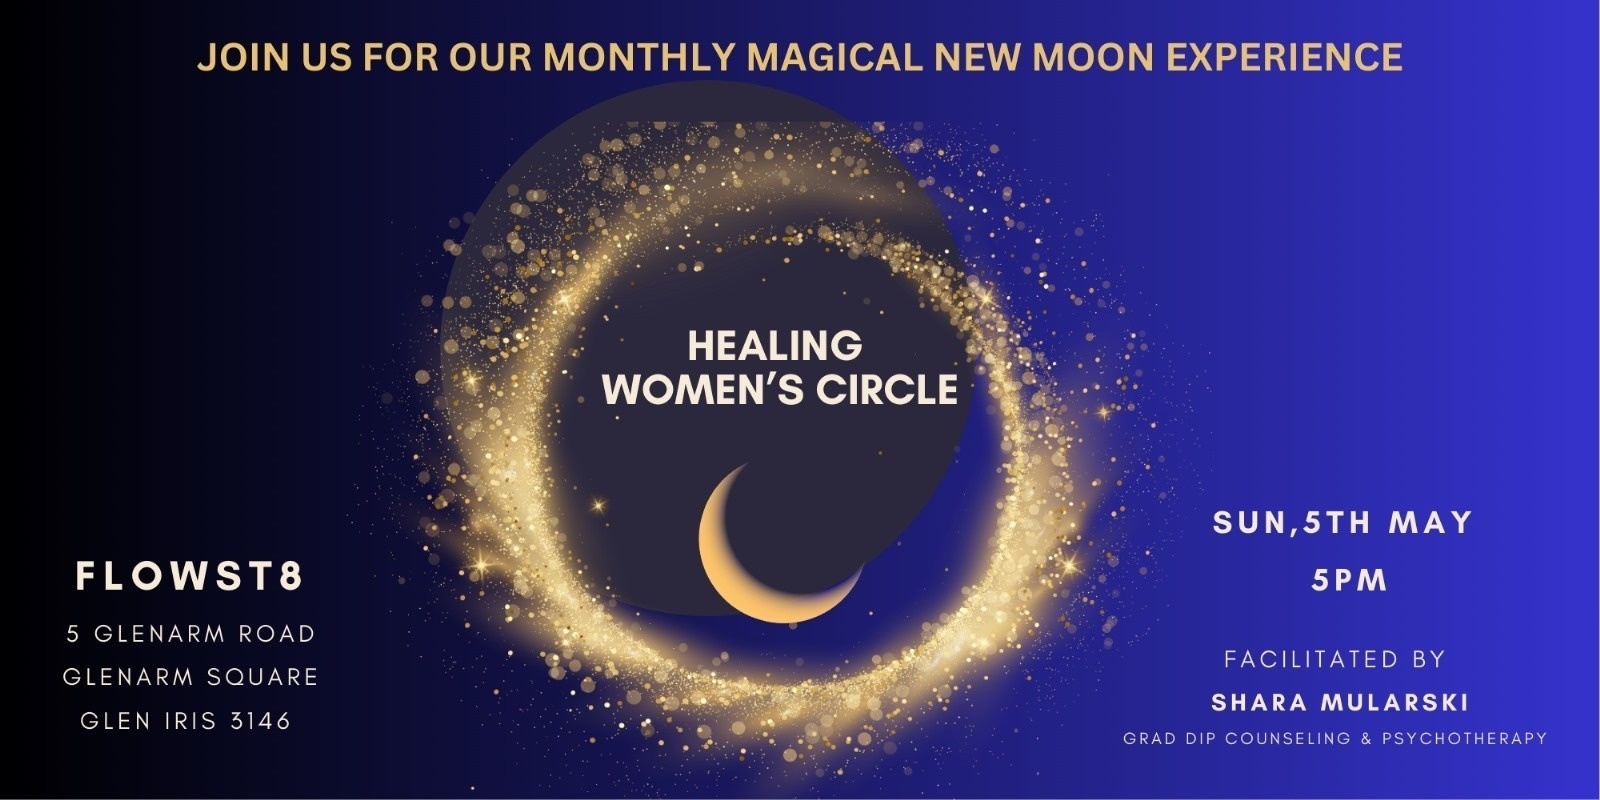 Banner image for Monthly New Moon Women's Circle